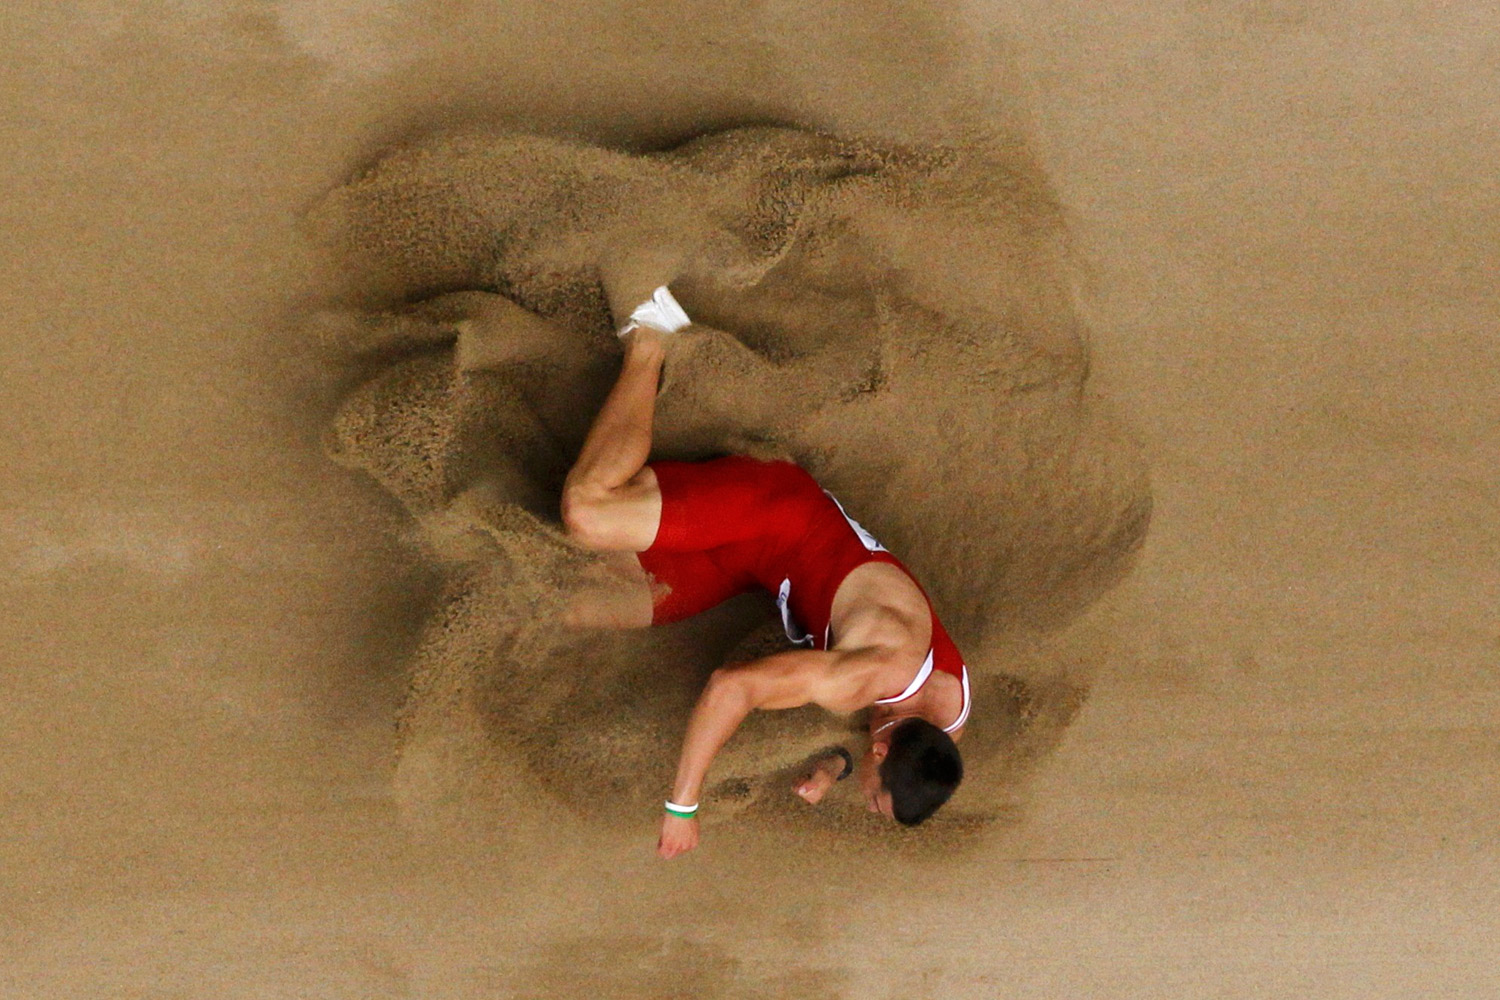 Mihail Dudas of Serbia competes during the long jump event of the men's decathlon at the IAAF World Athletics Championships in Daegu, South Korea, August 27, 2011.